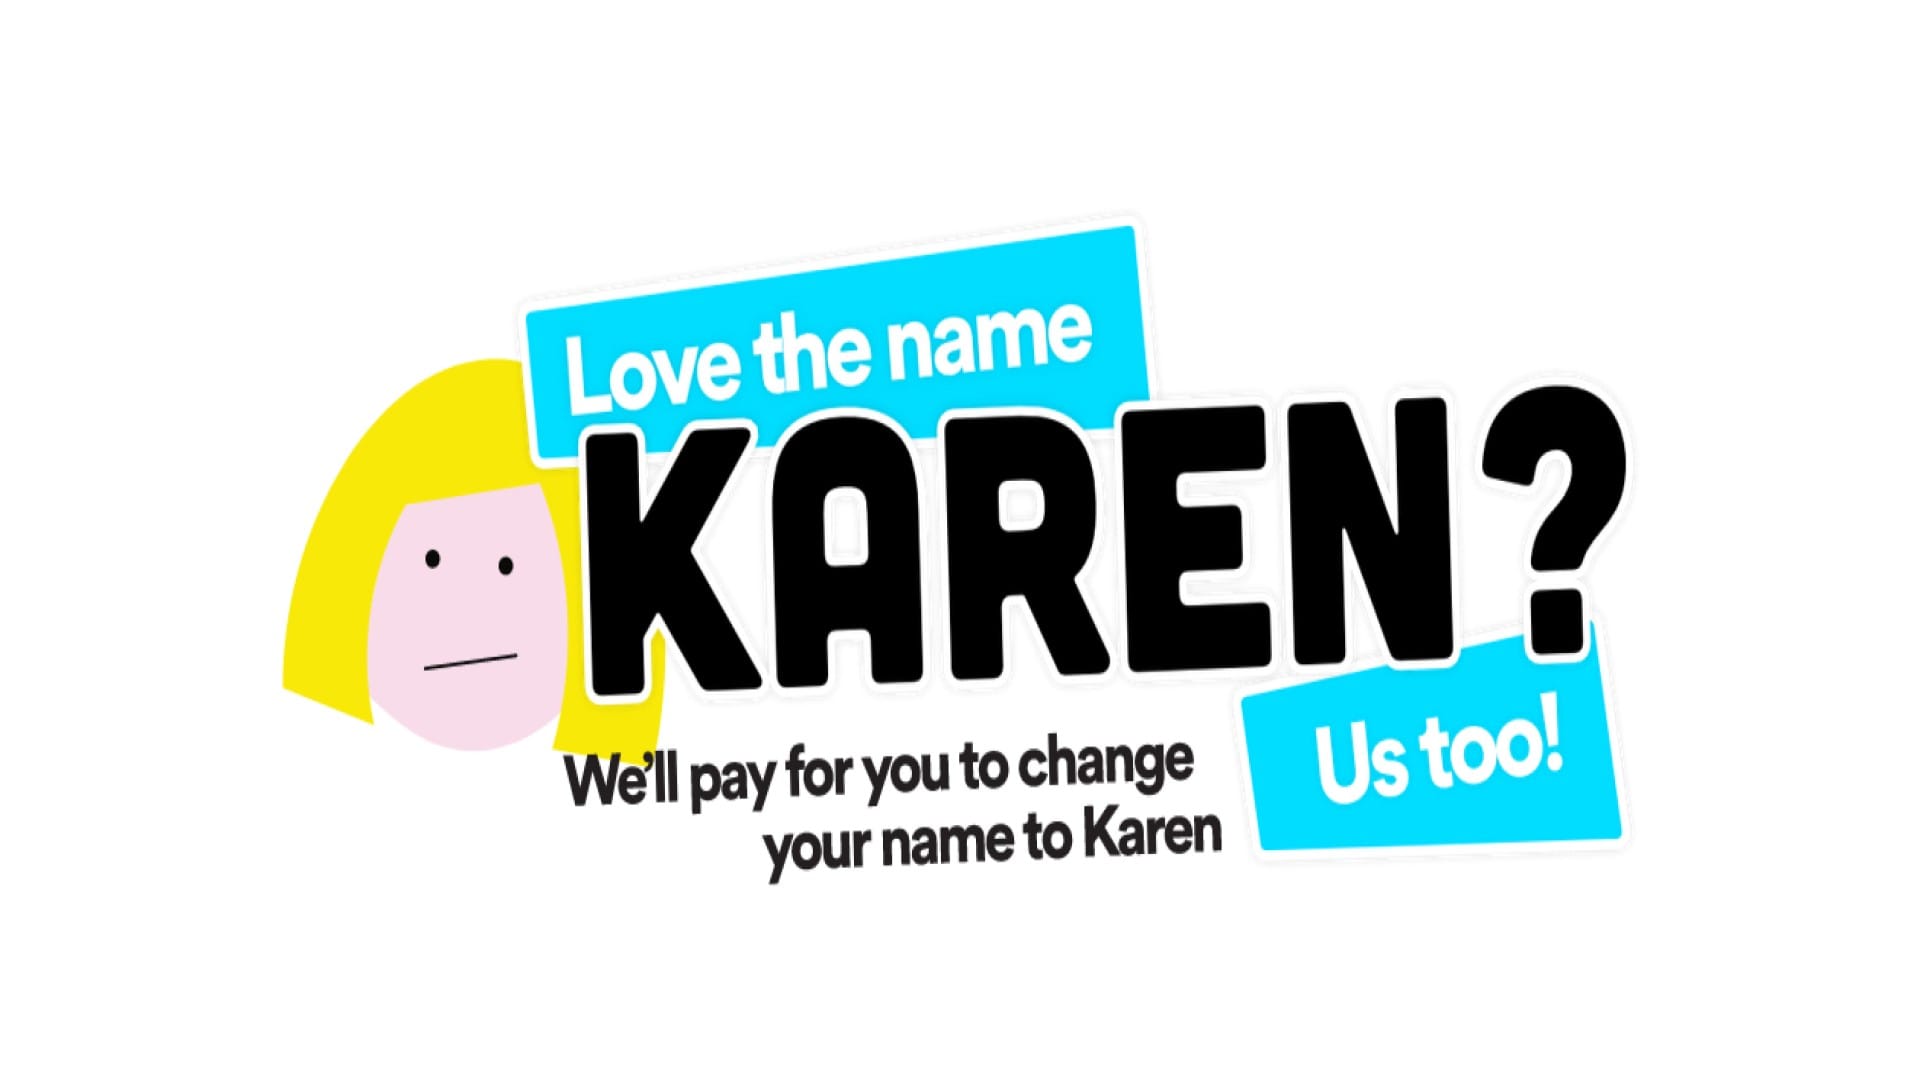 The logo banner for Format Games' Save The Karens contest